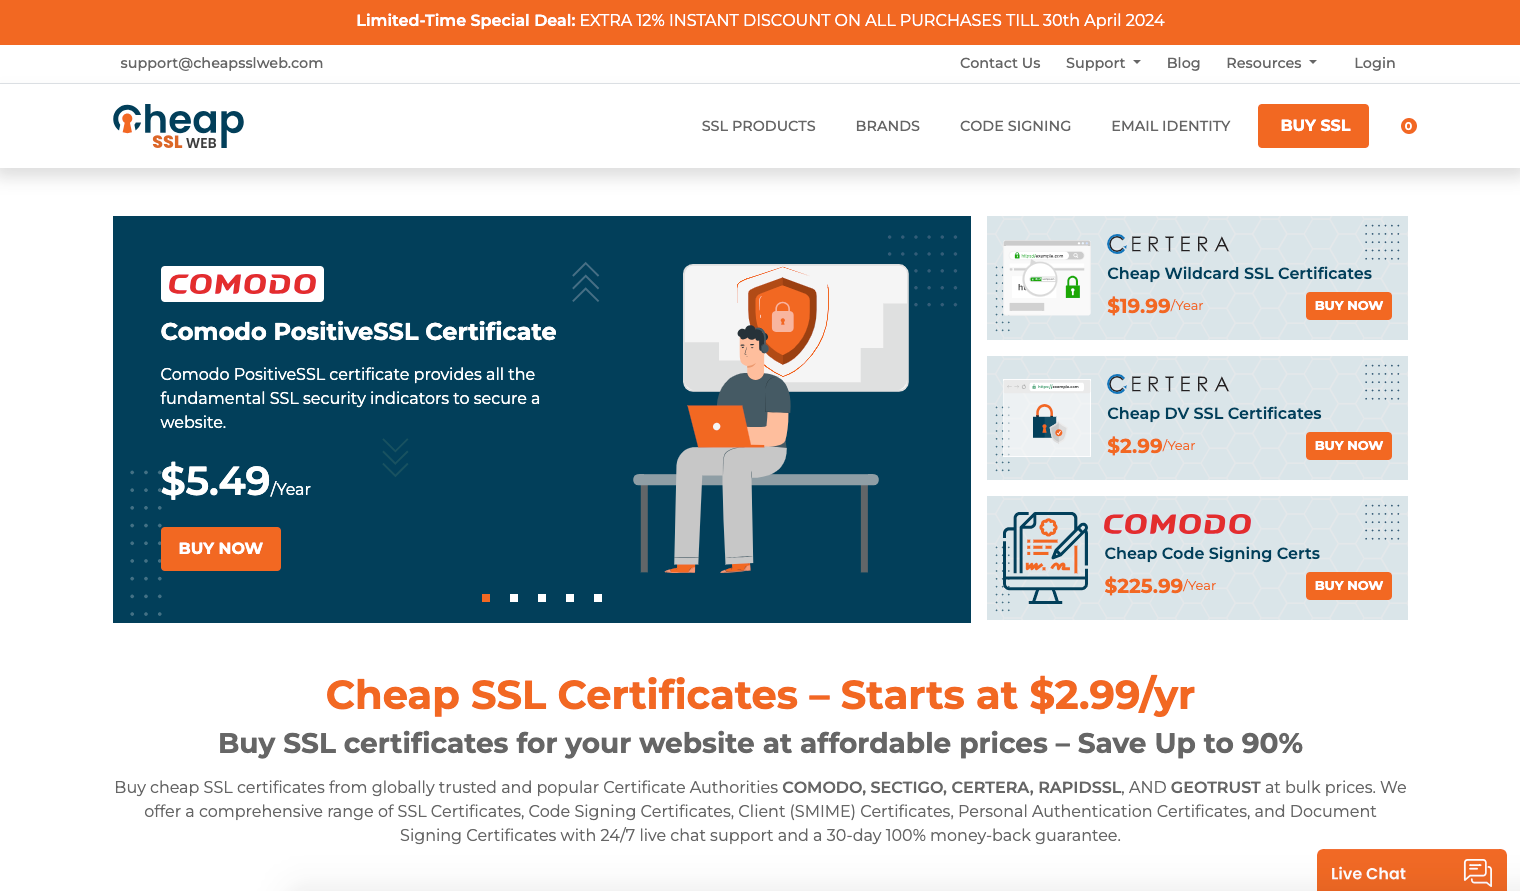 Cheap Code Signing Certificate at $49.99 Per Year